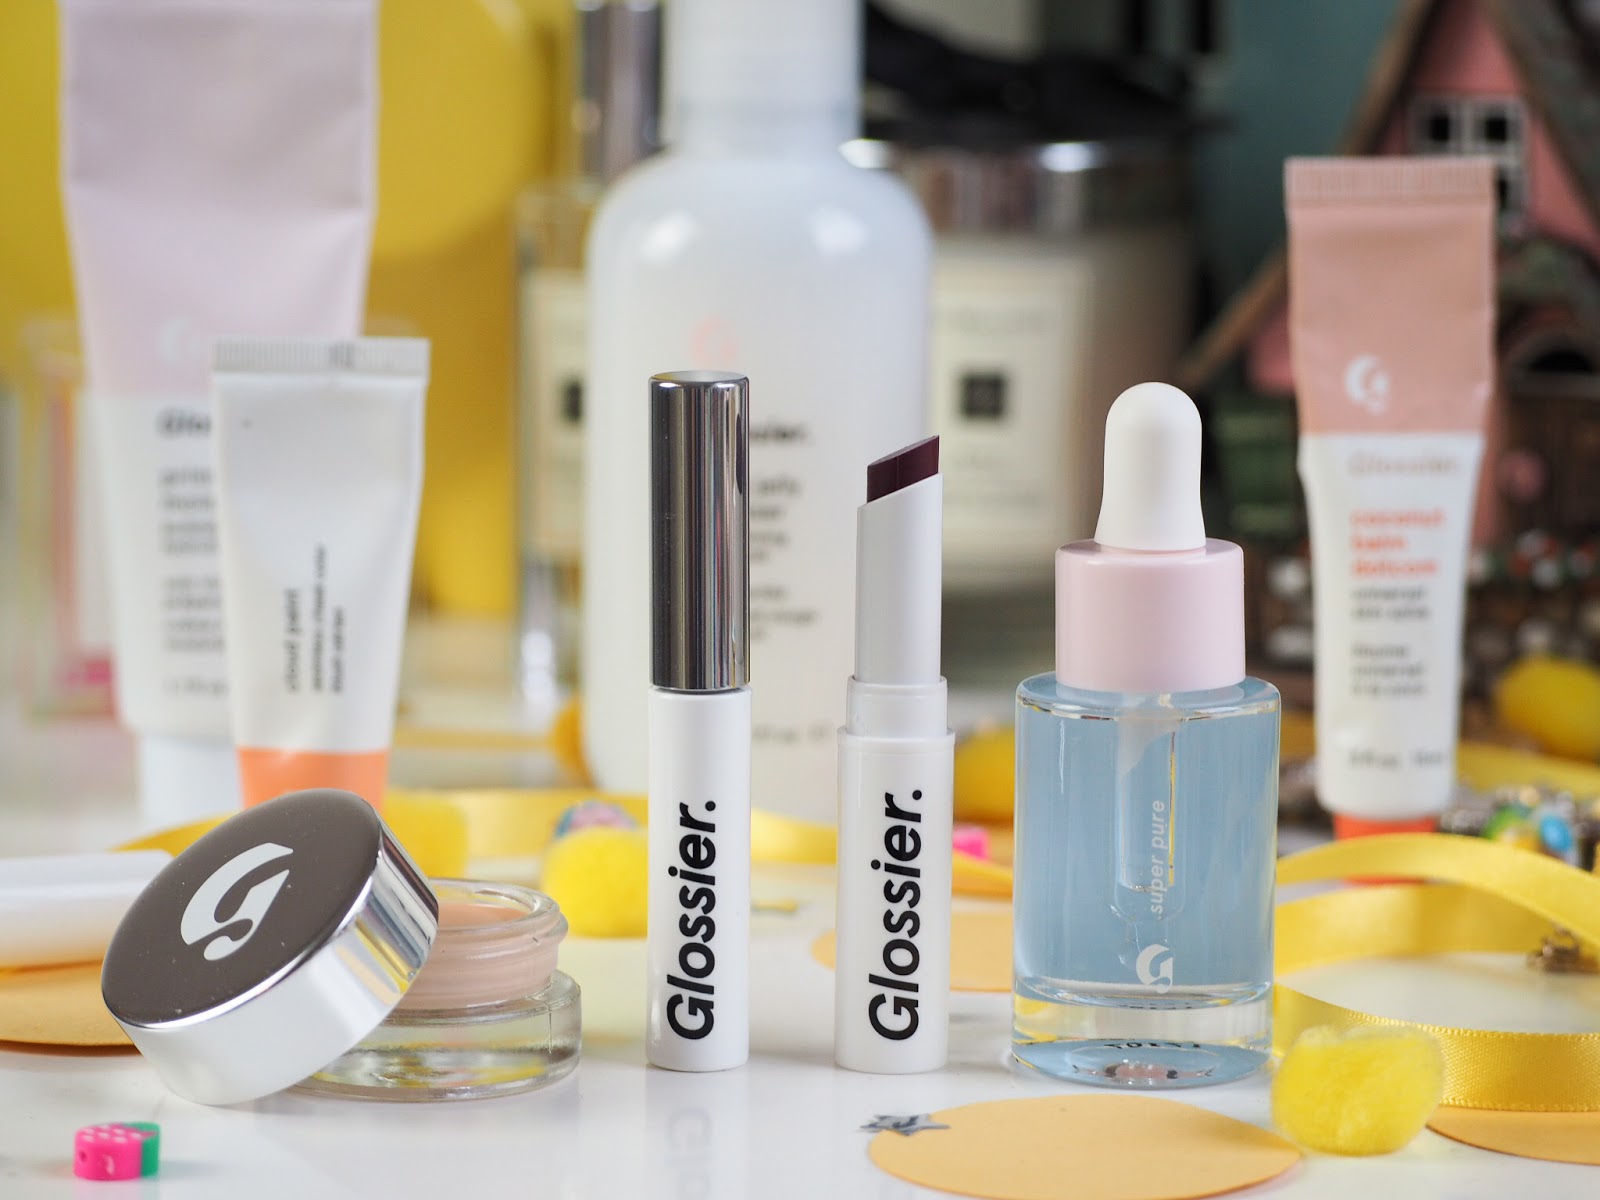 Glossier: A Second Chance (Phase 2 + Super Pure Review) 